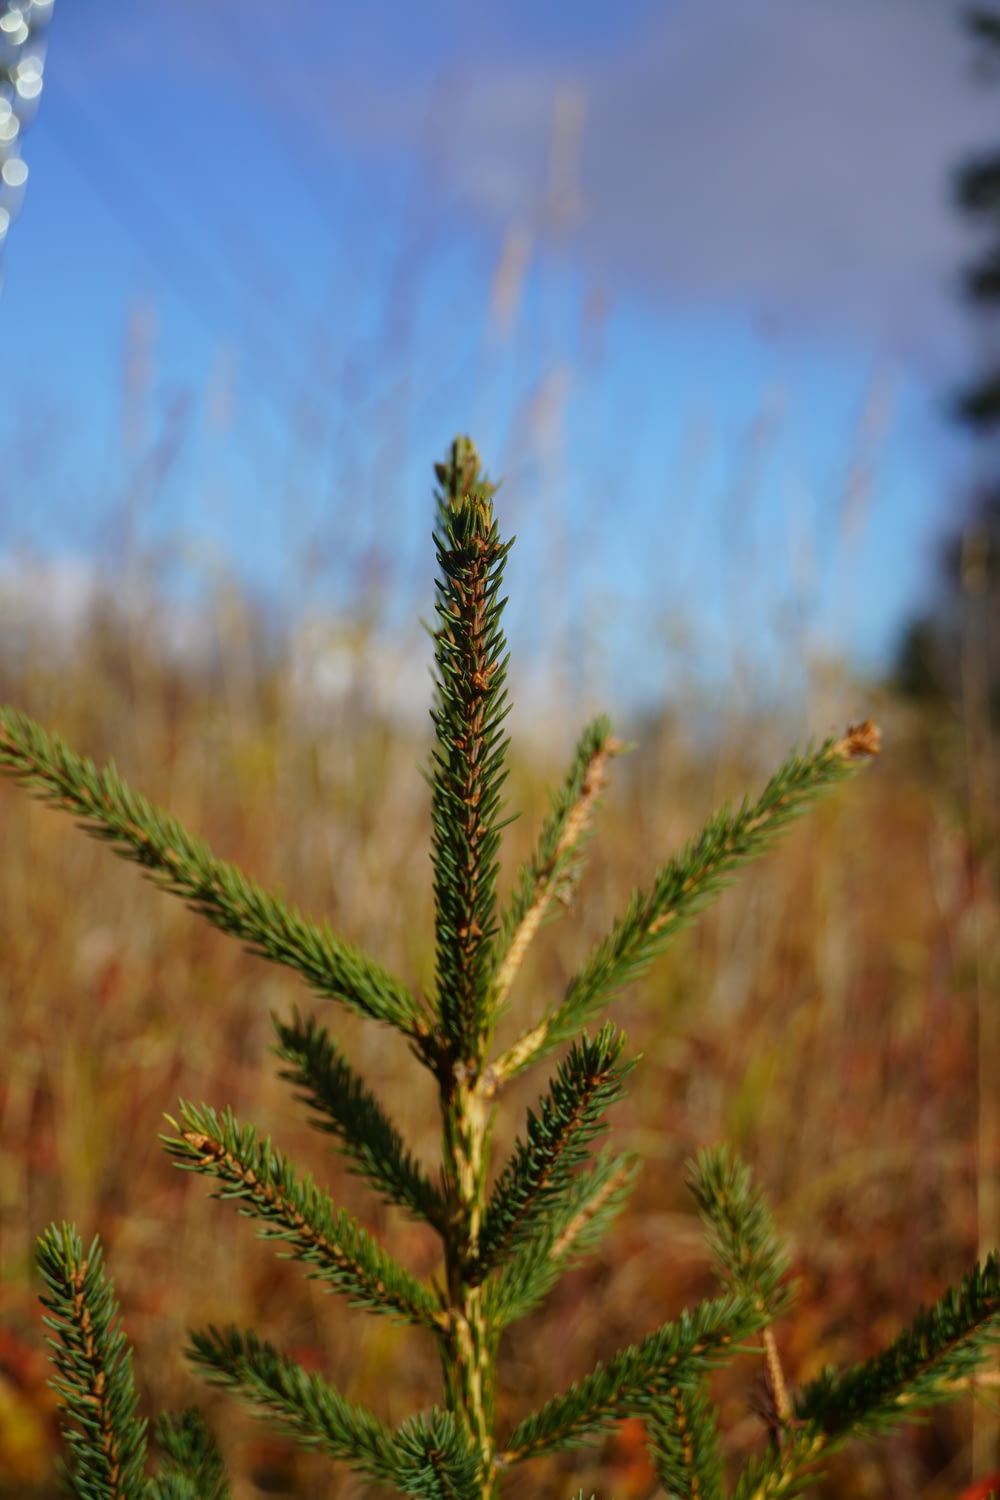 a close up of a pine tree in a field